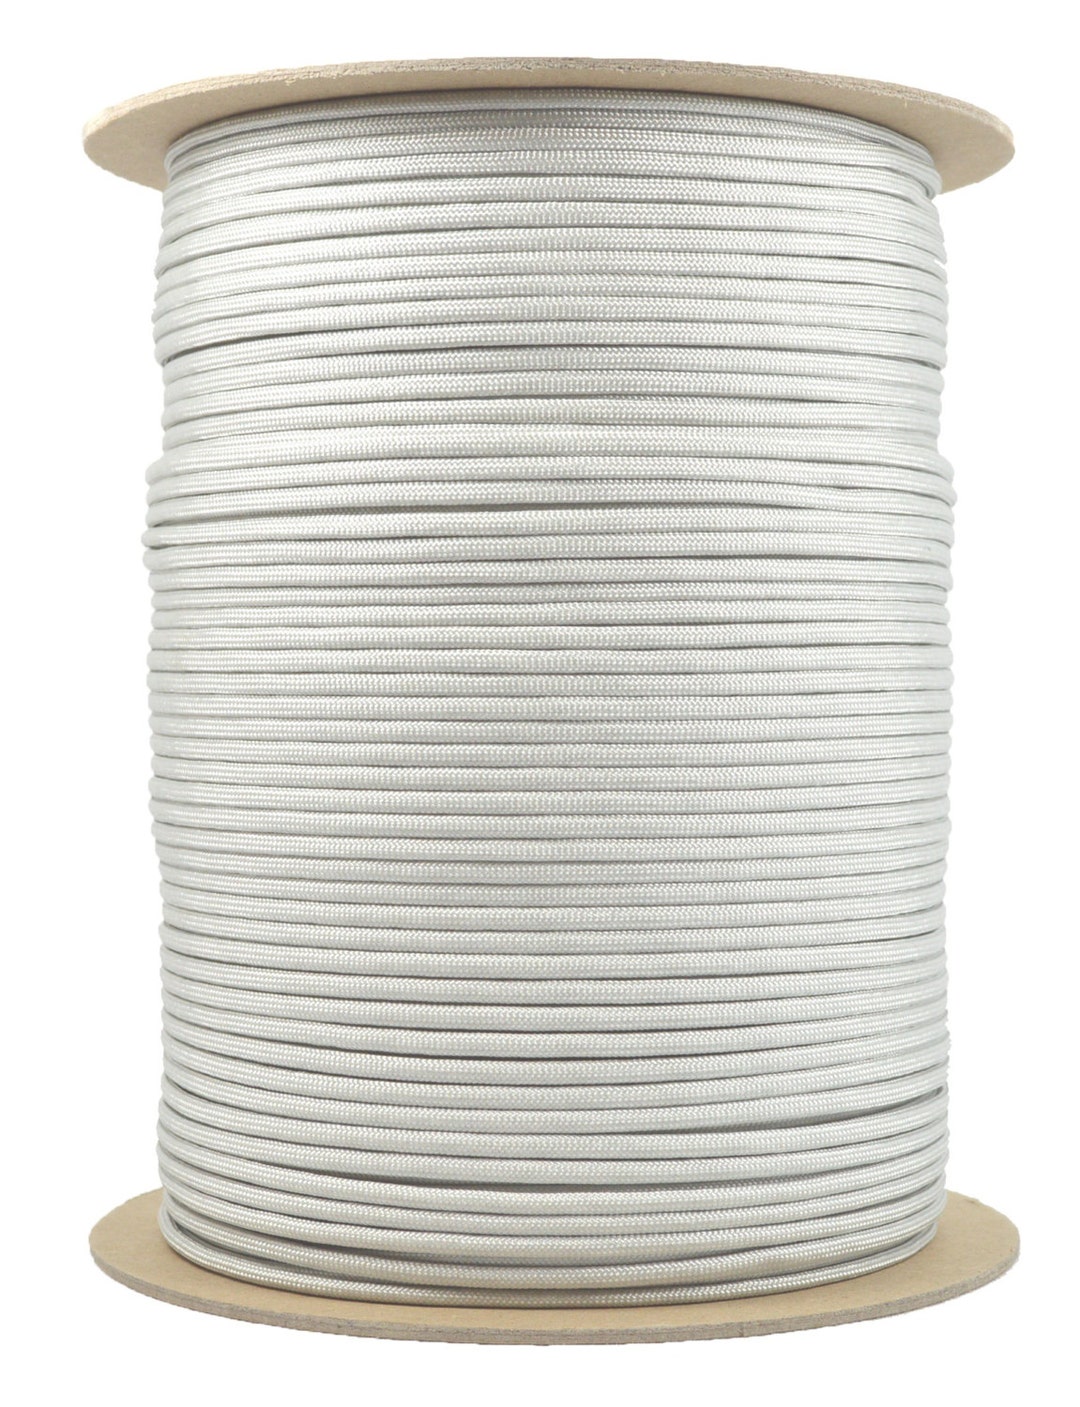 Silver Grey 1000 Foot Spool 550 Paracord for Paracord Crafts Made in the  United States -  Australia